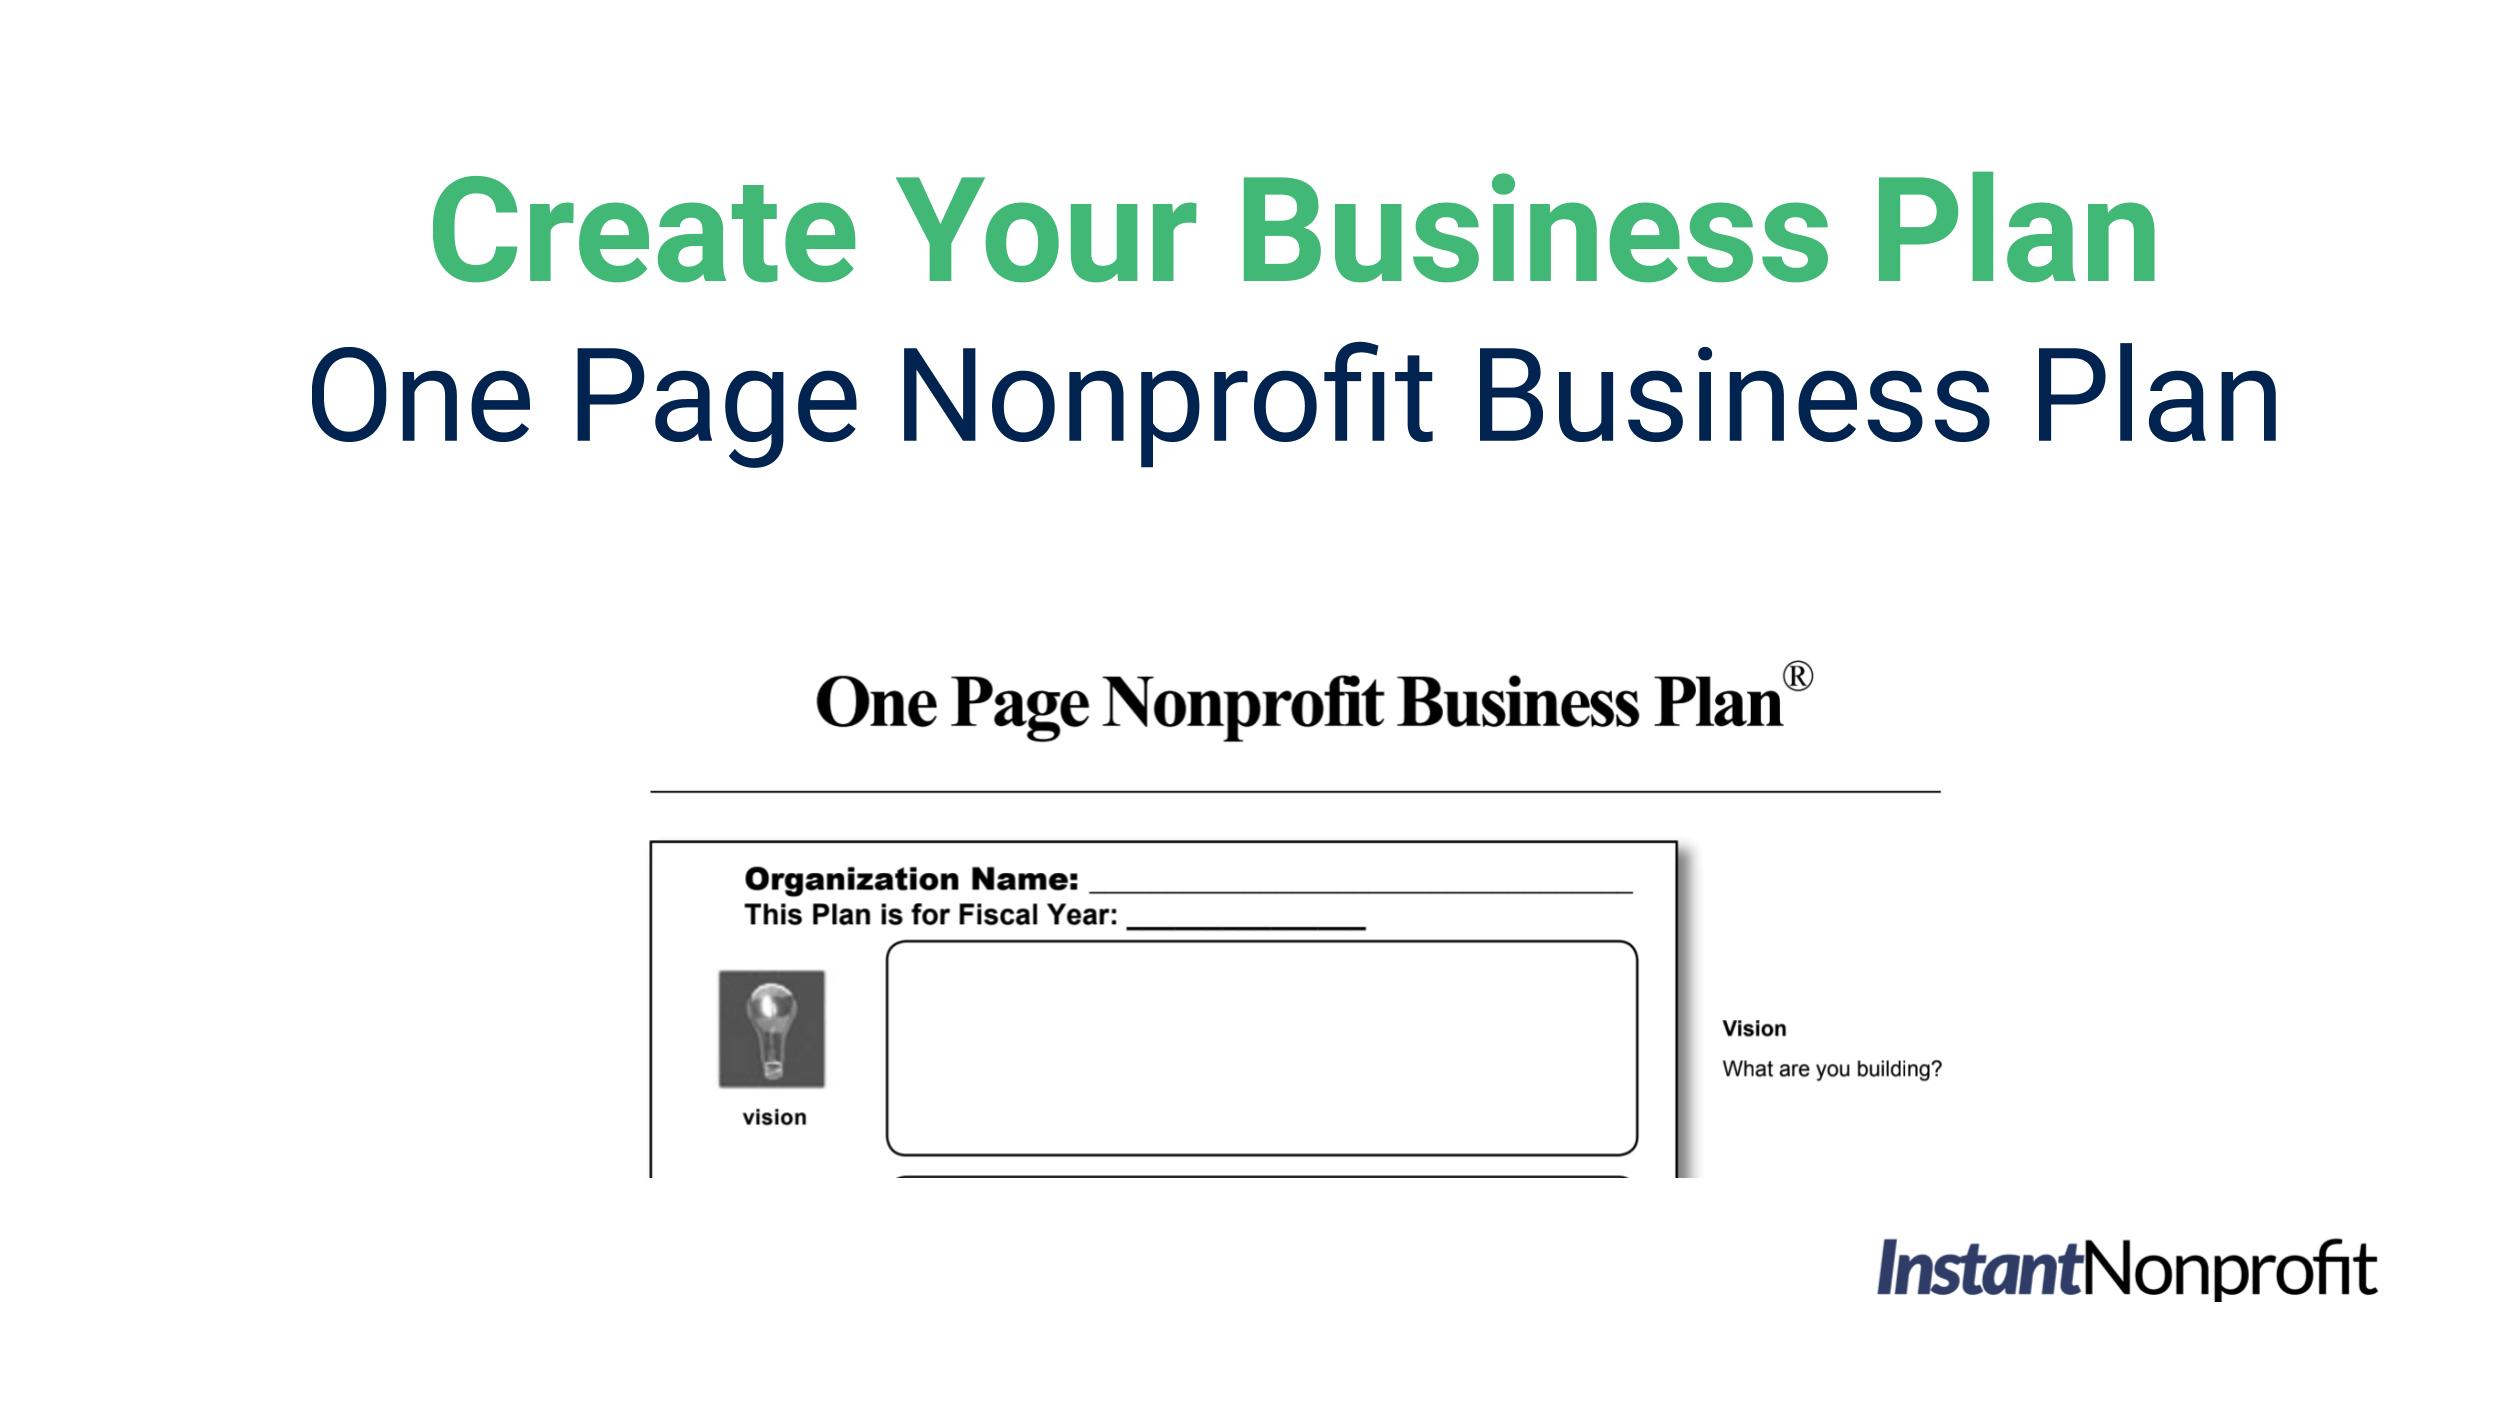 One-Page Nonprofit Business Plan [Worksheet]